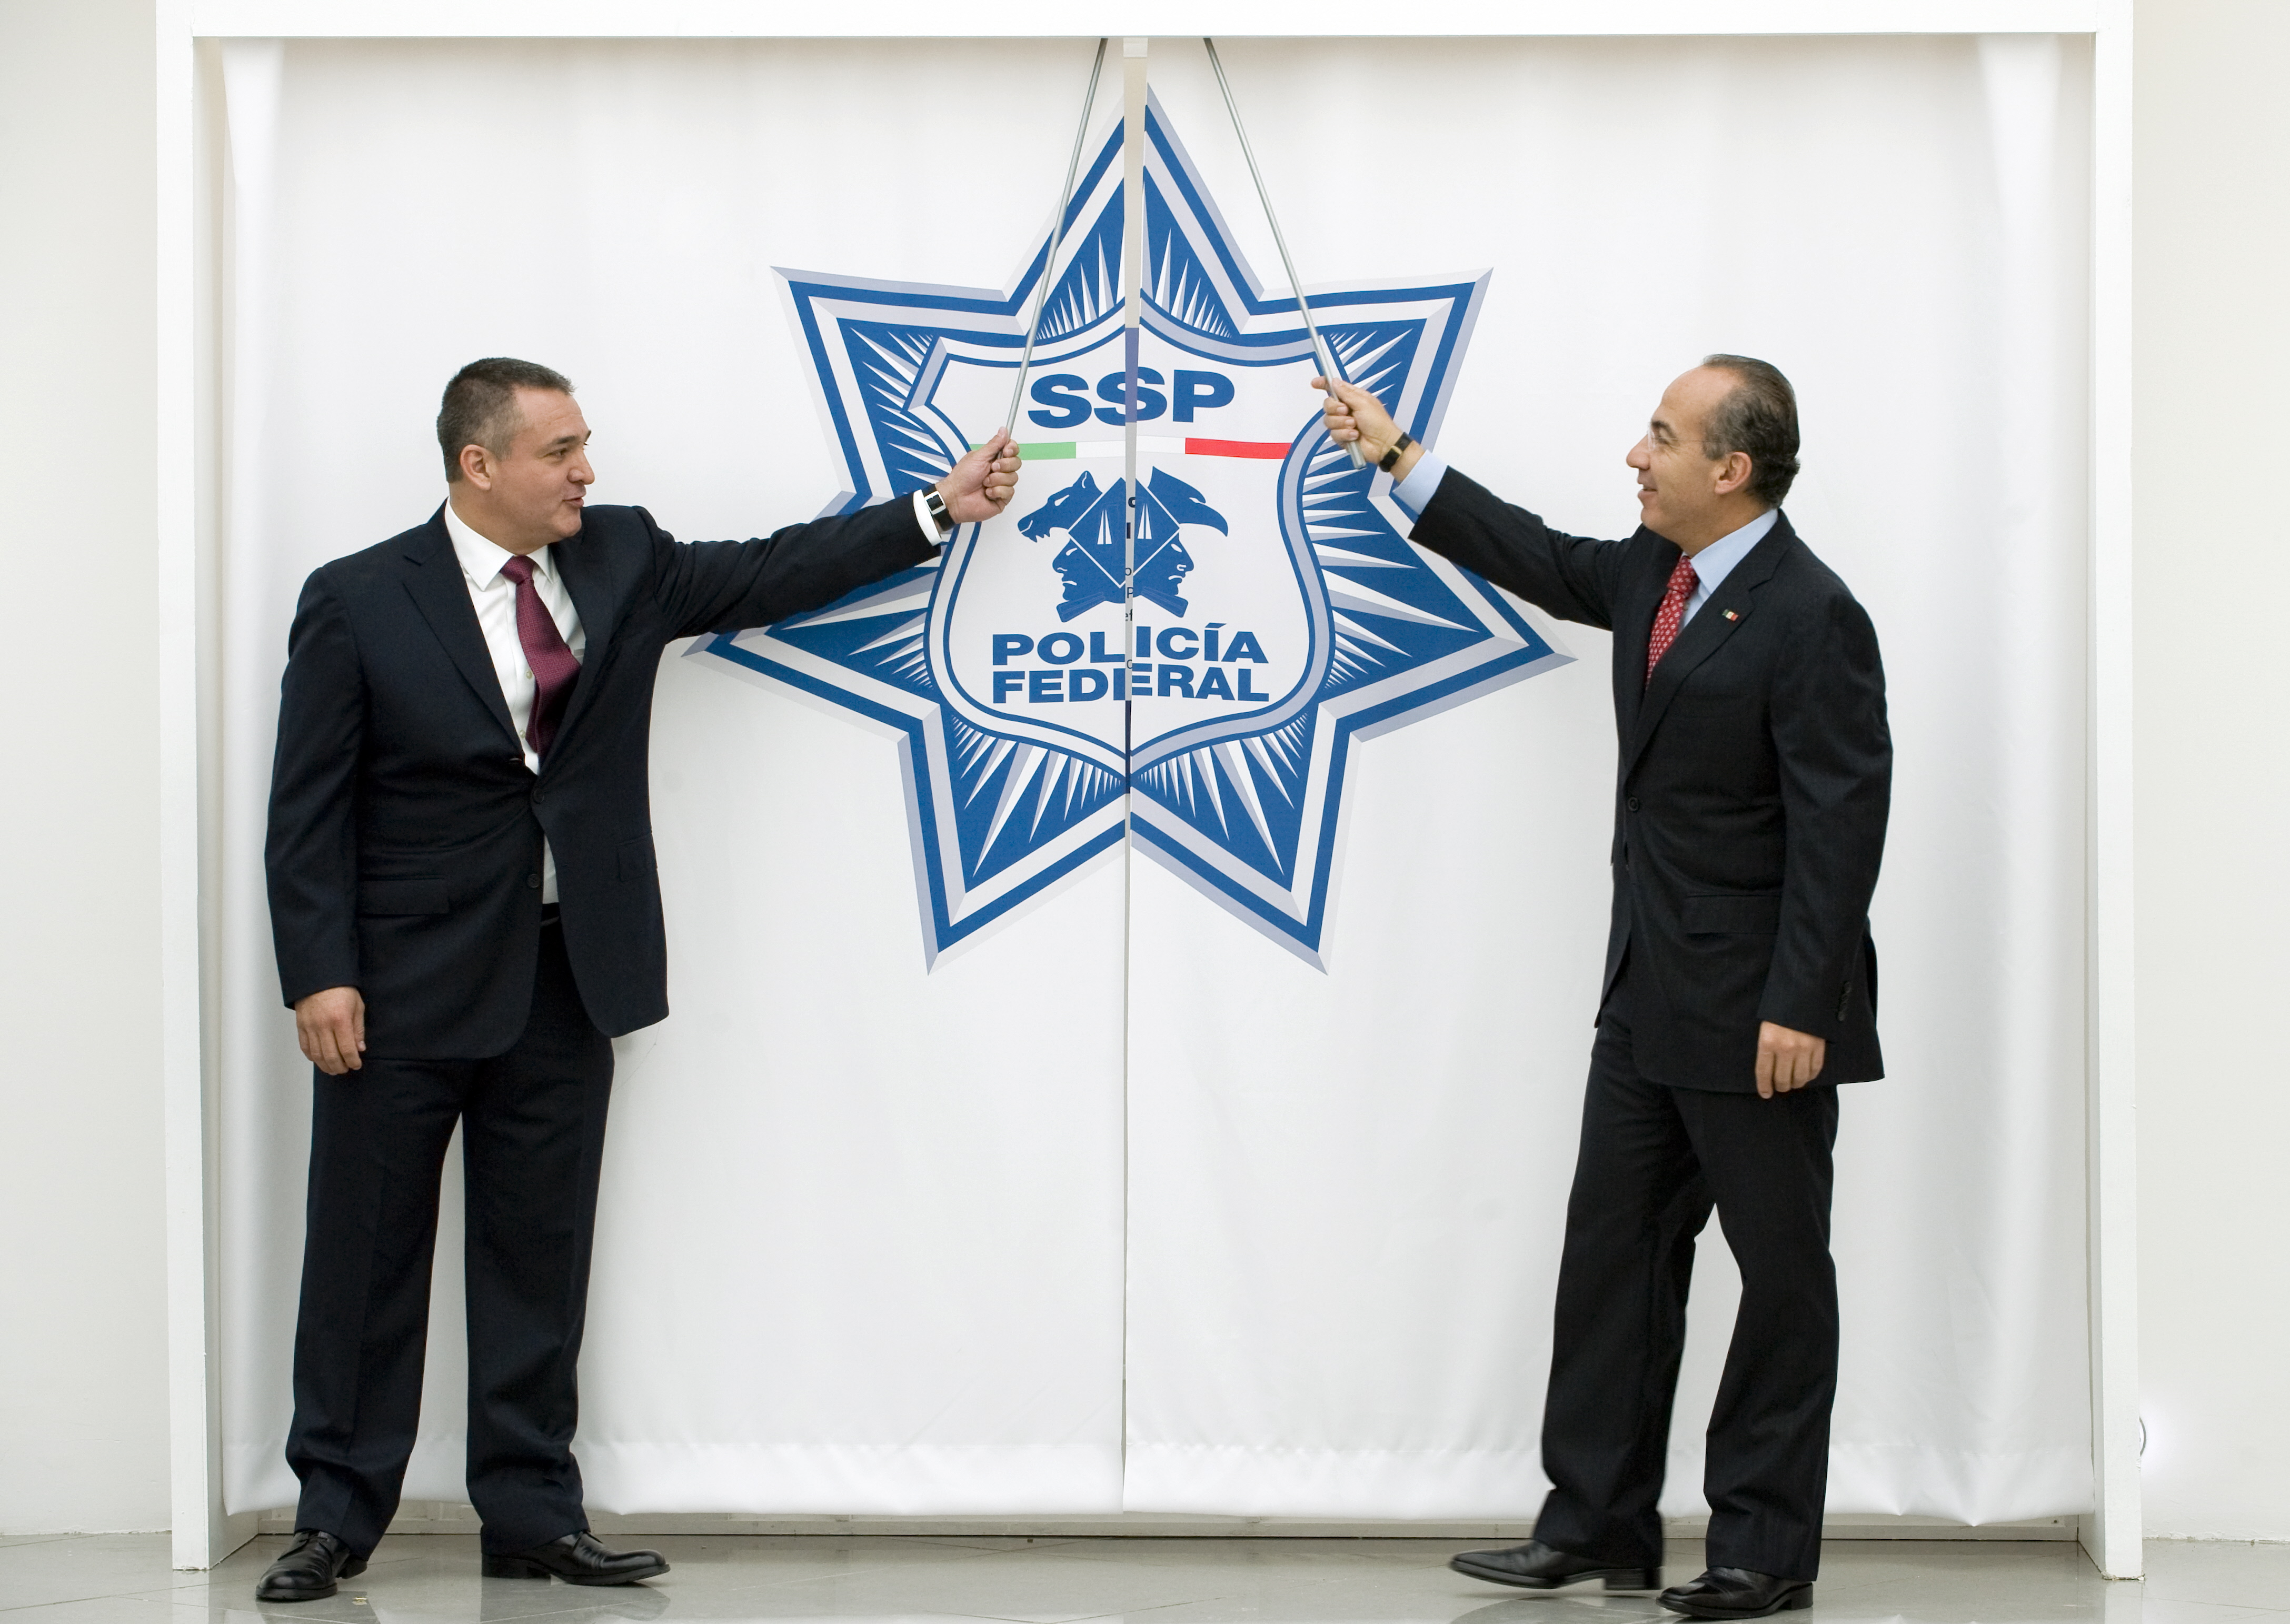 Mexican President Felipe Calderon (R) and the Secretary of the Mexican Federal Police Genaro Garcia Luna (L) prepare to inaugurate the Mexican Federal Police new Intelligence Center, in Mexico City, on November 24, 2009.